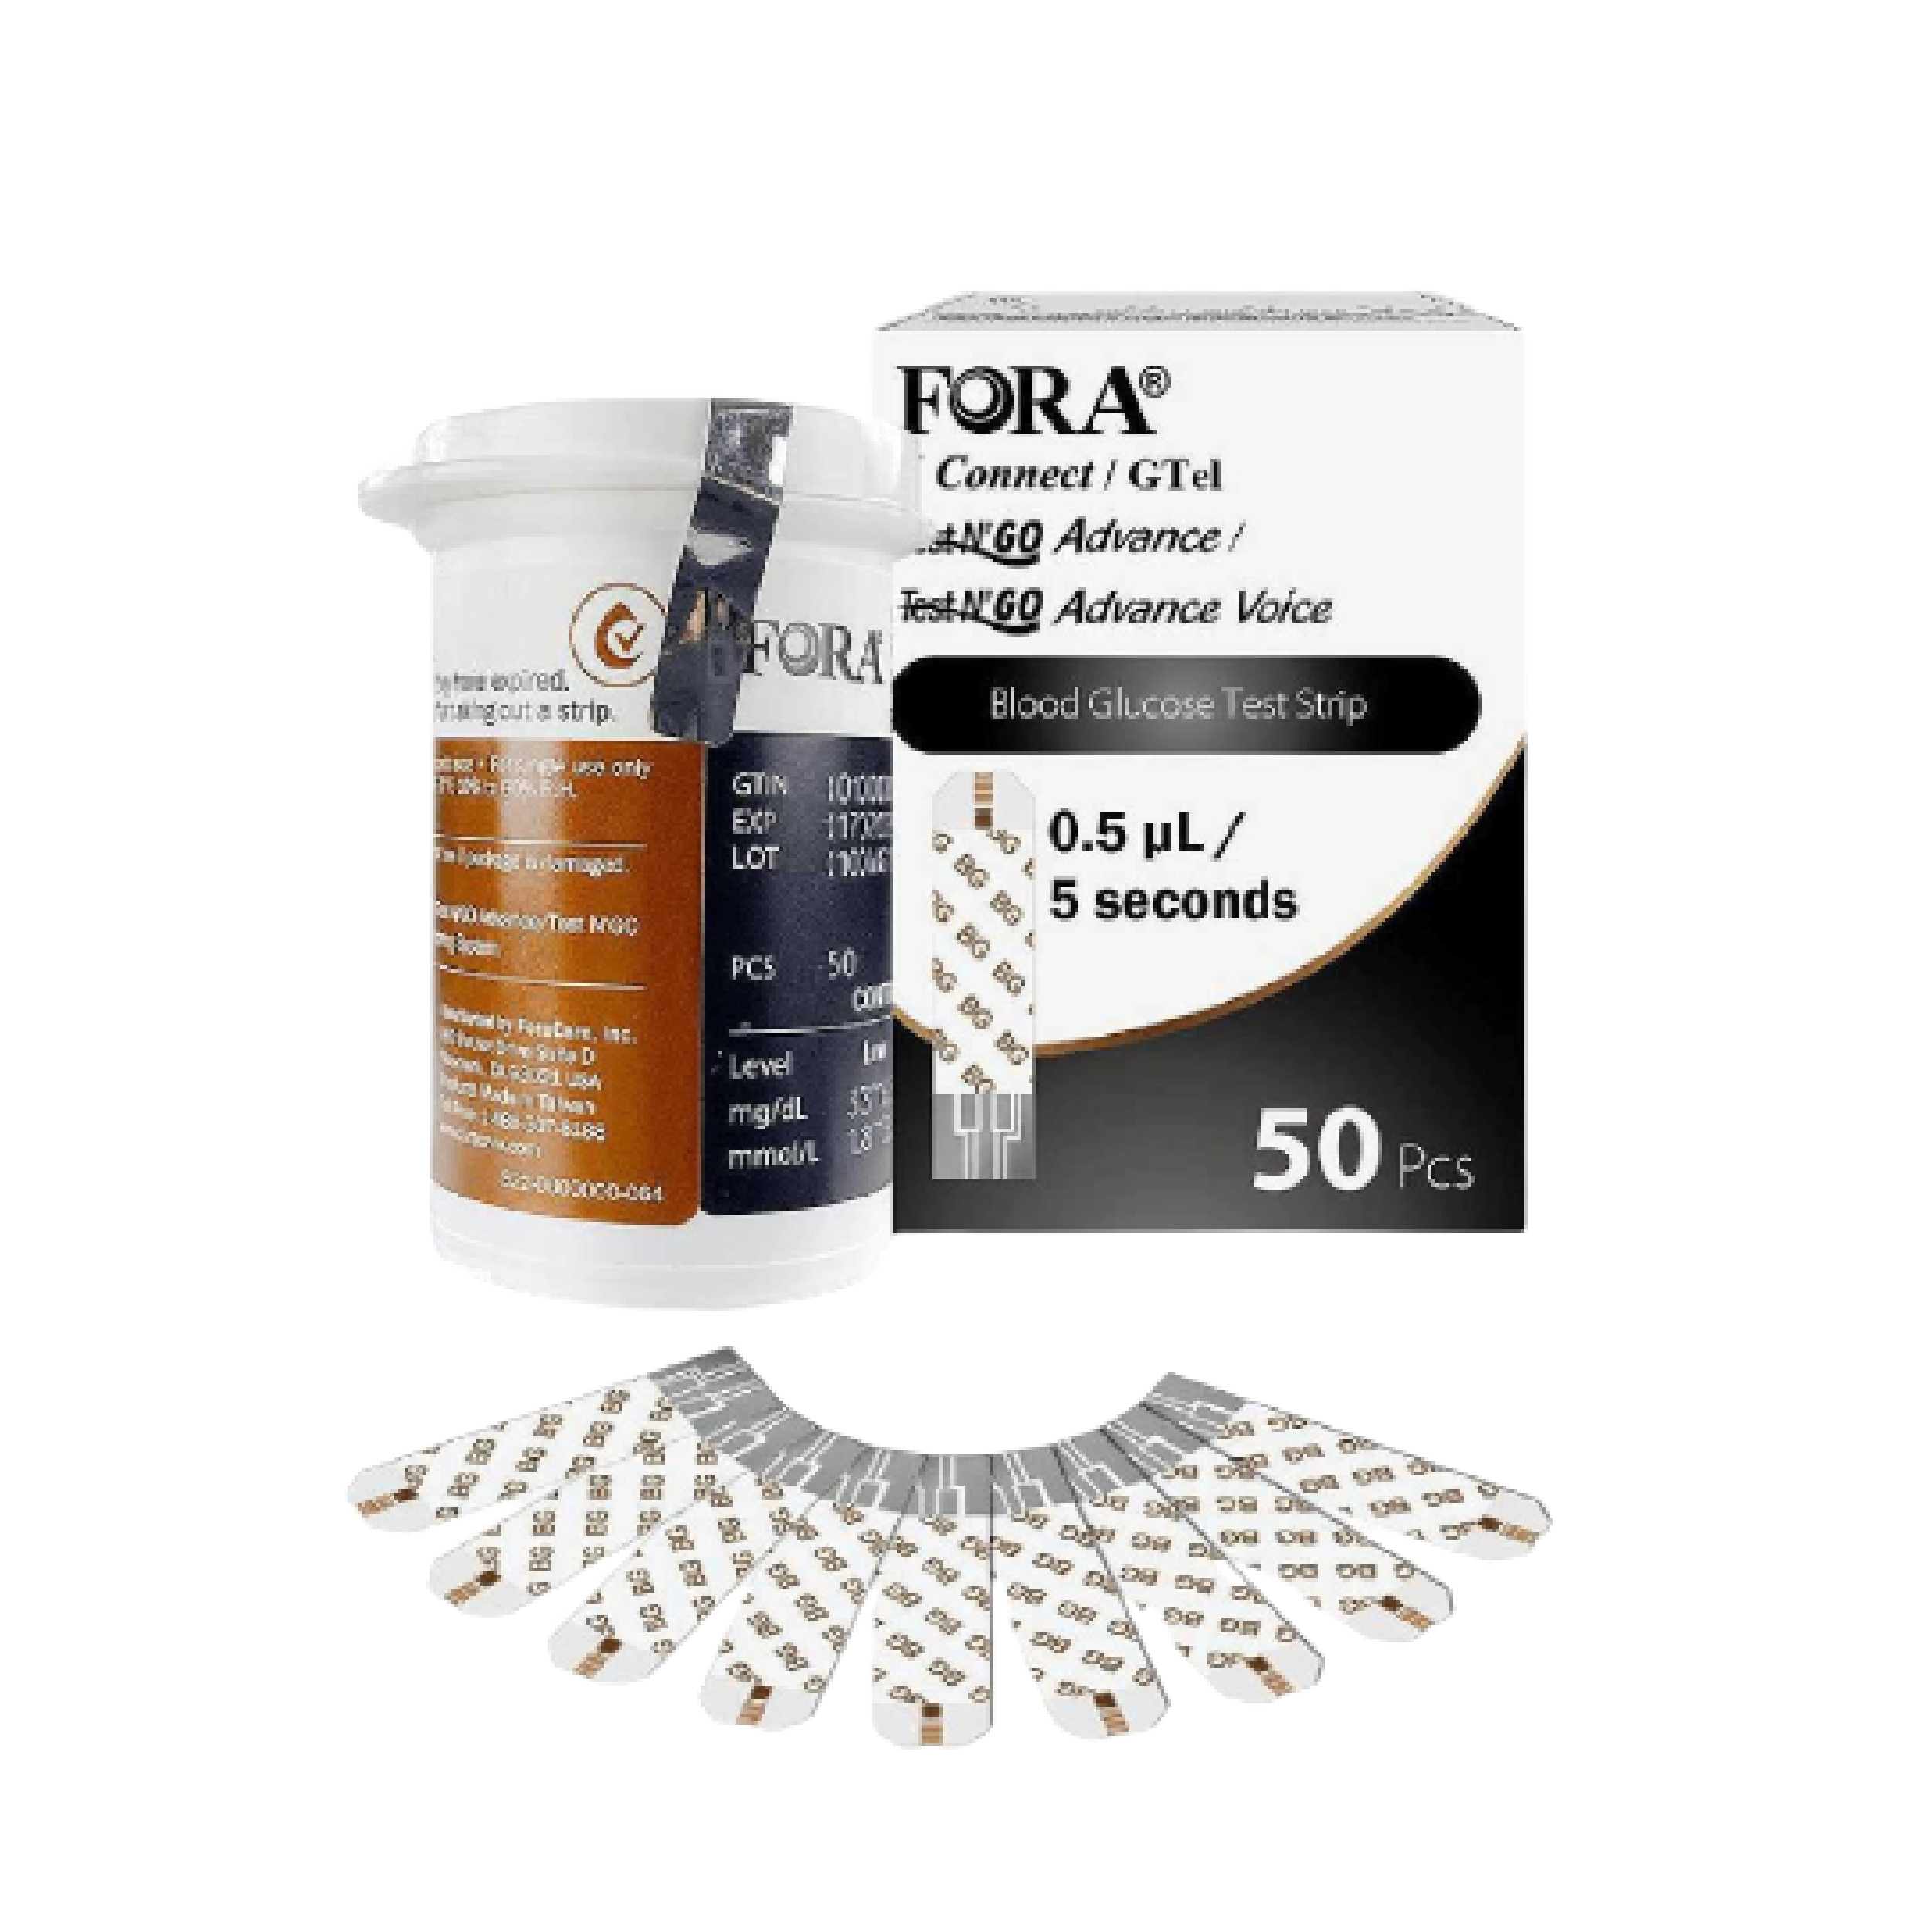 FORA 50-Count Glucose Test Strips for 6Connect and Test N'Go Advance Voice Meters